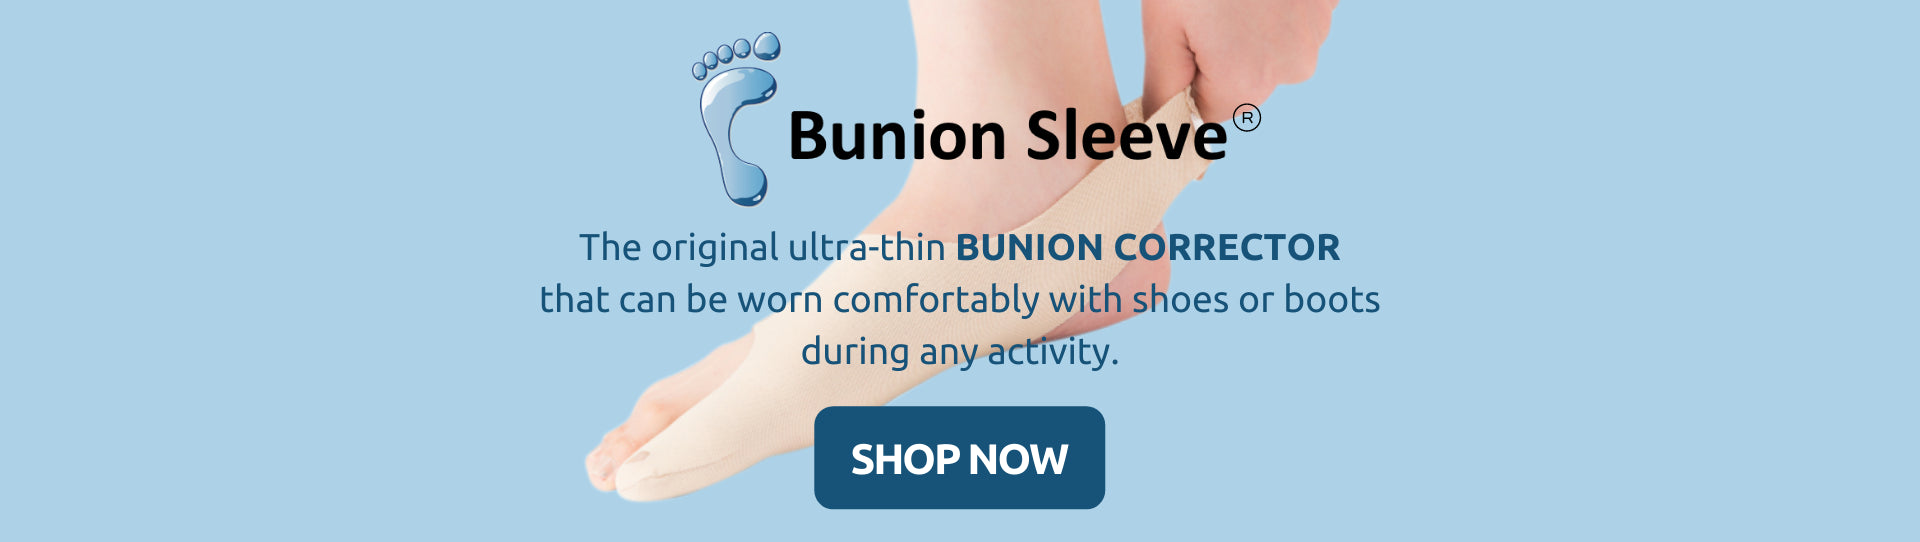 bunion corrector at boots